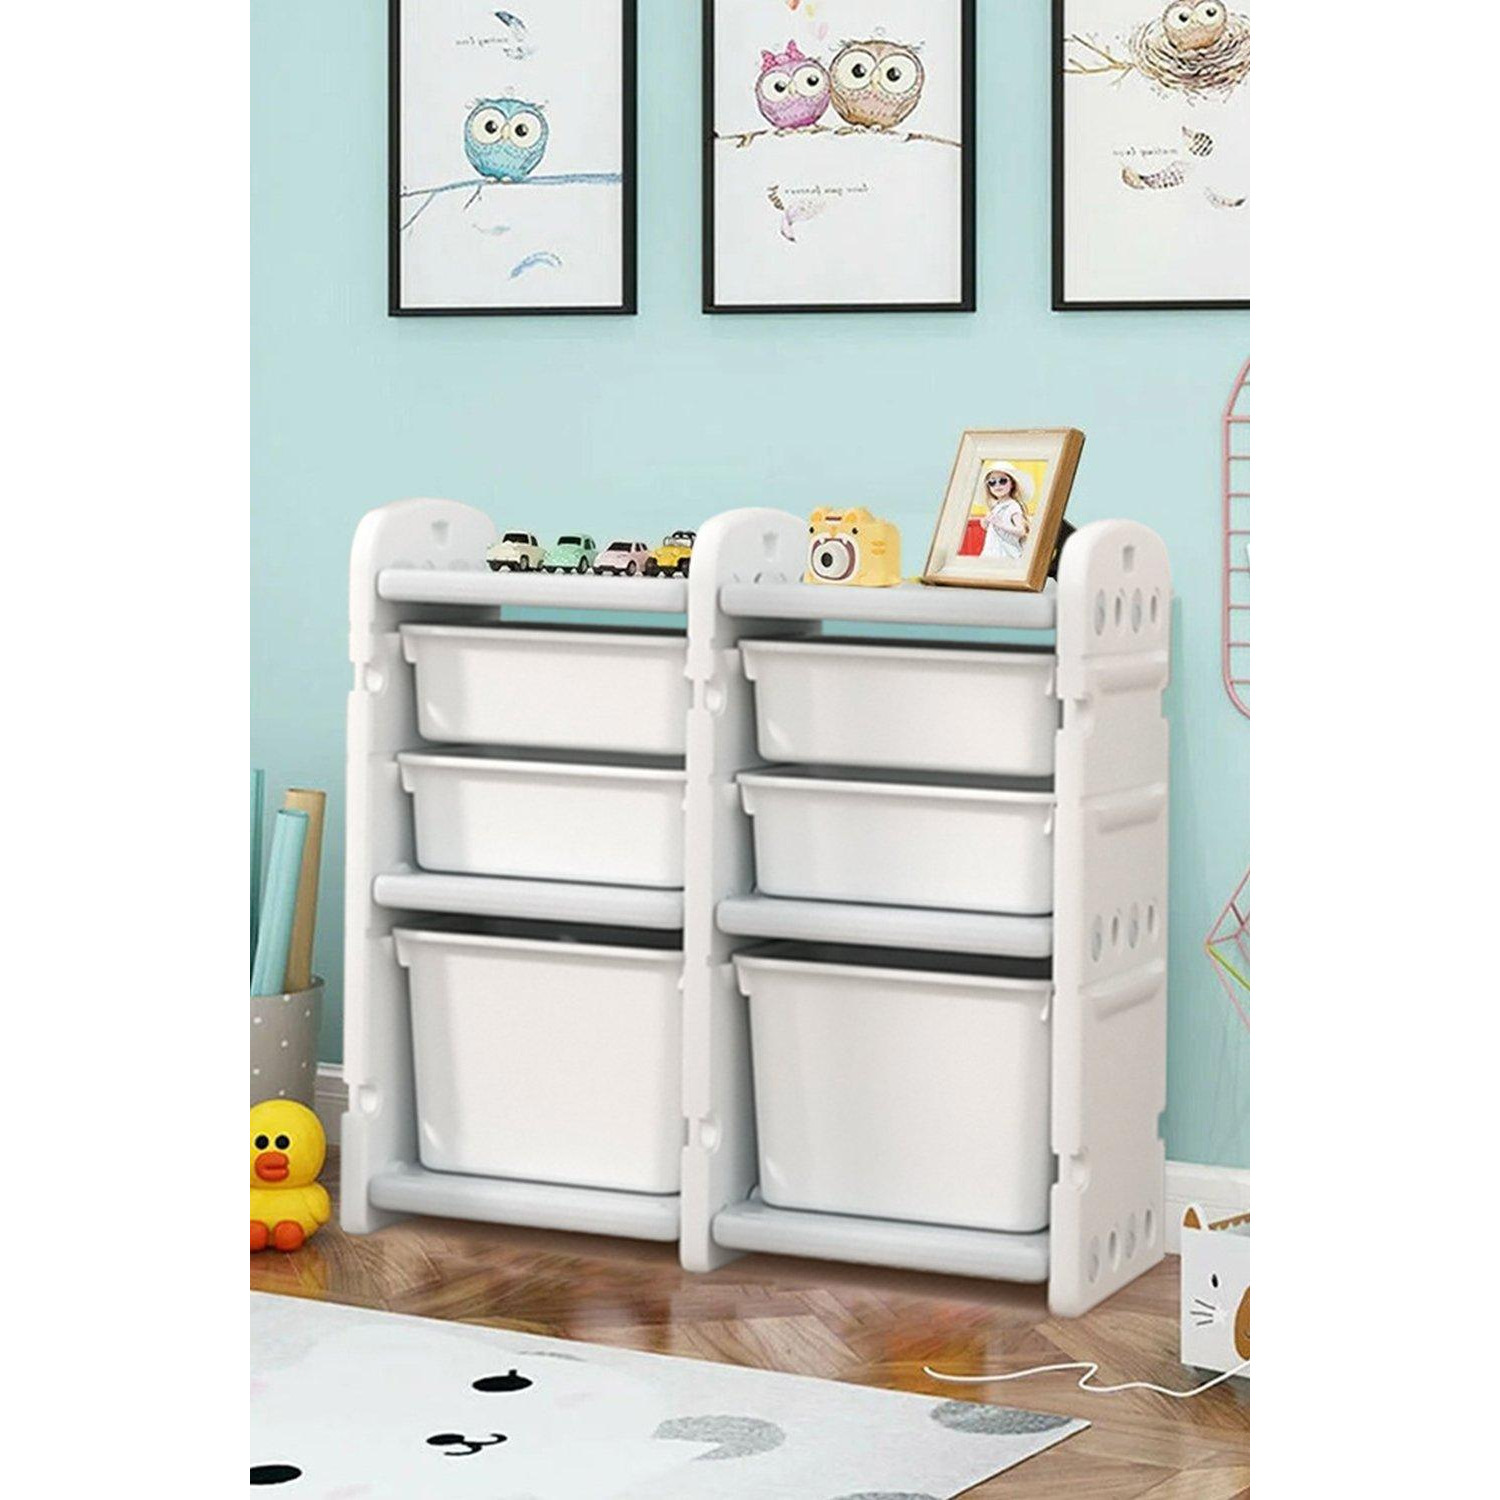 Kids Storage Cabinet for Toys Clothes Books, Plastic Organizer - image 1